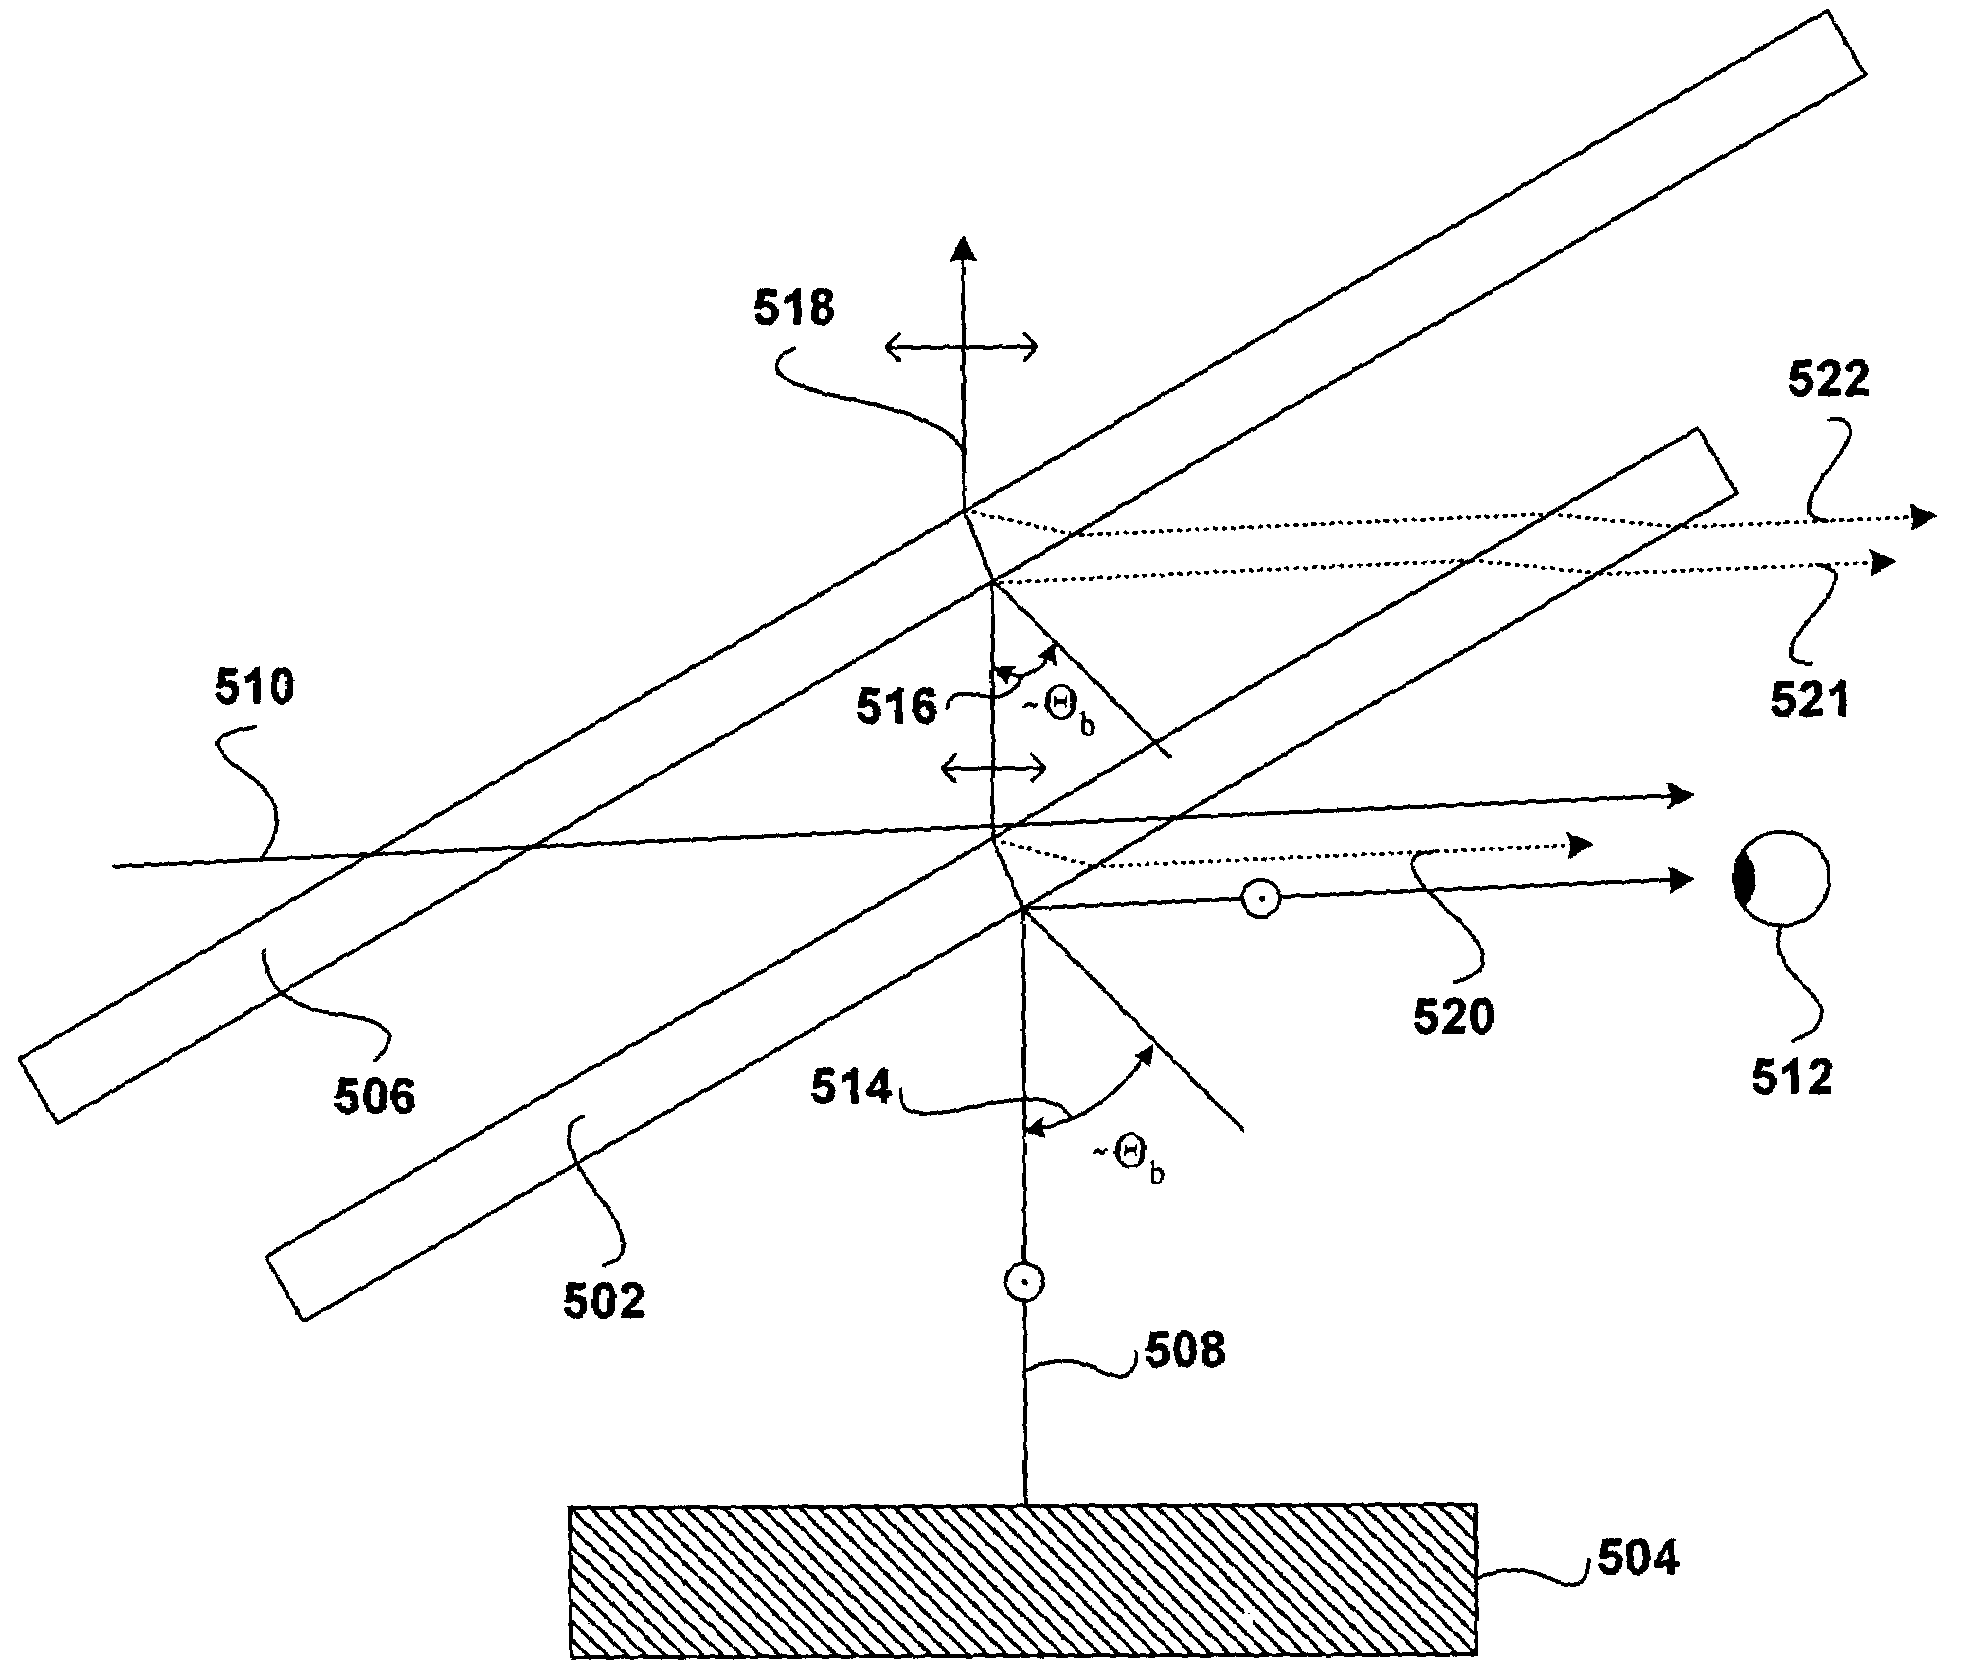 Visual display system for displaying virtual images onto a field of vision